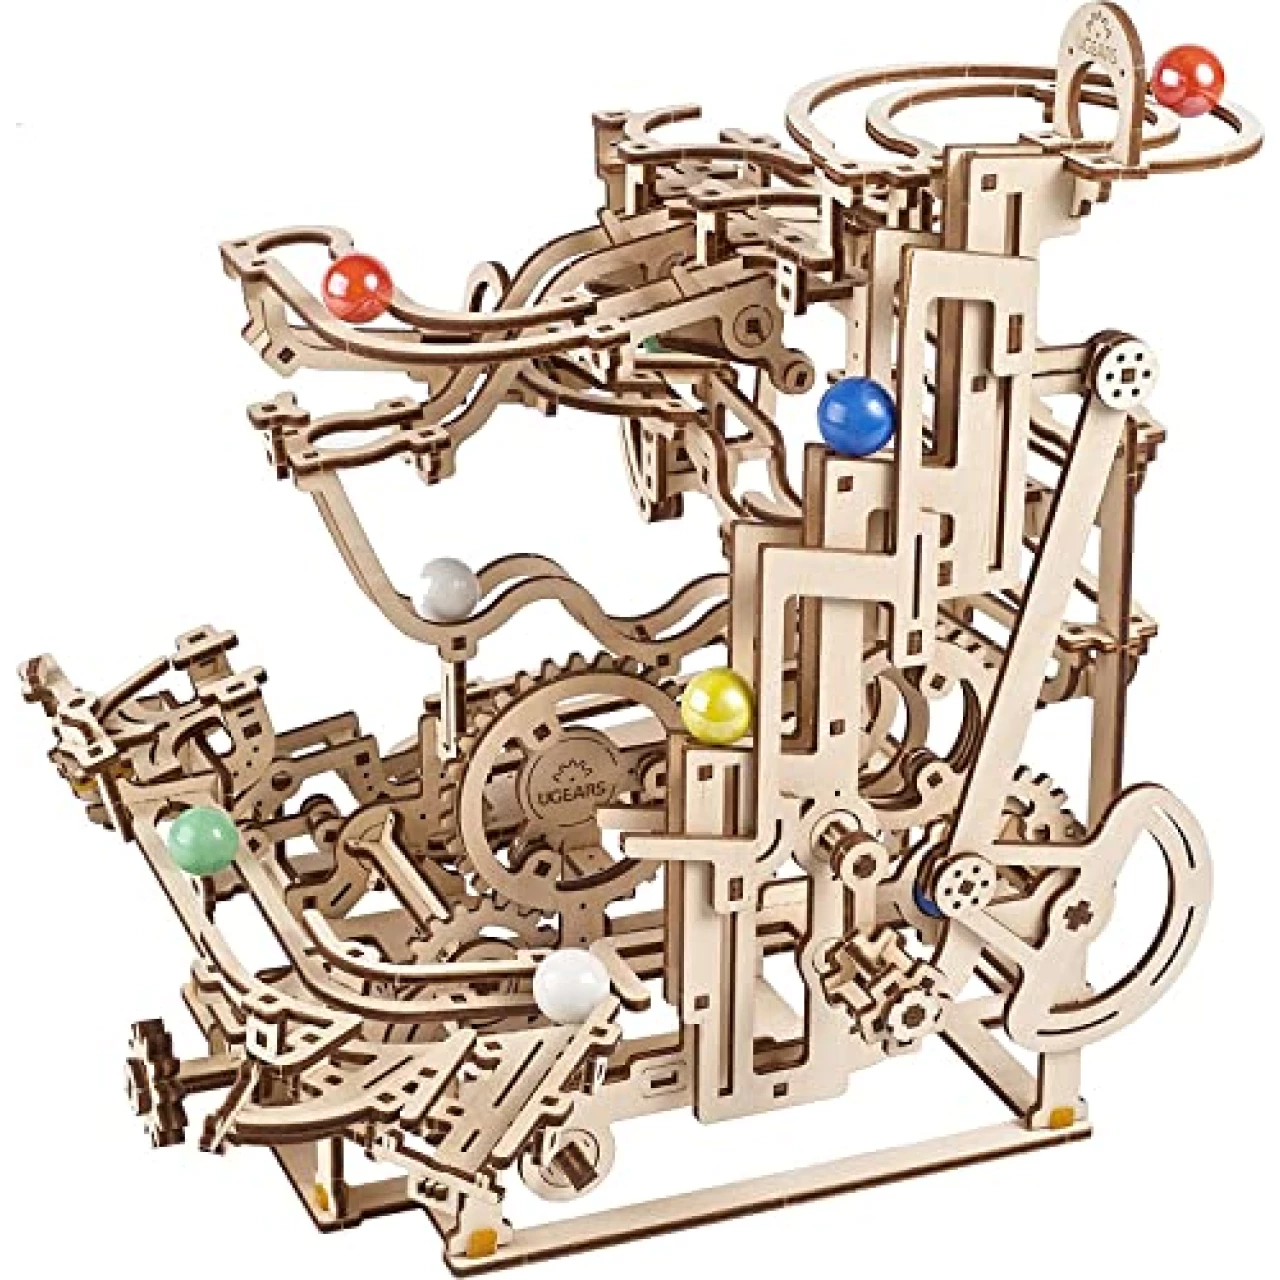 UGEARS Marble Run Tiered Hoist - Wooden Marble Run Kit with 10 Colored Marbles